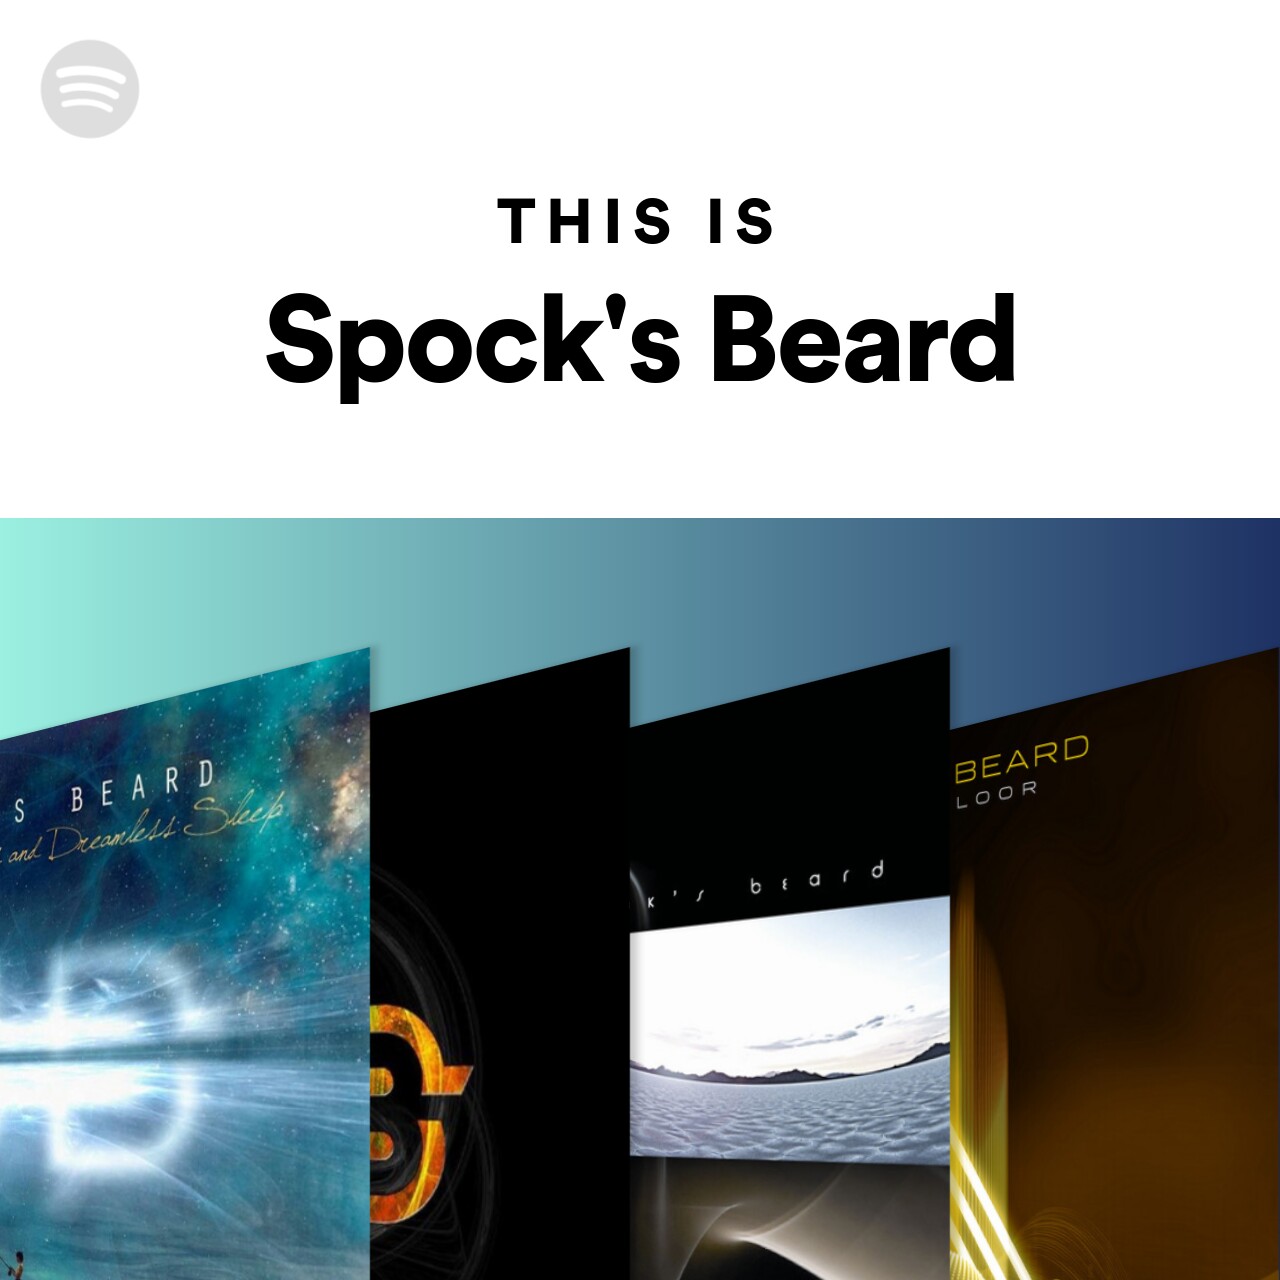 This Is Spock's Beard